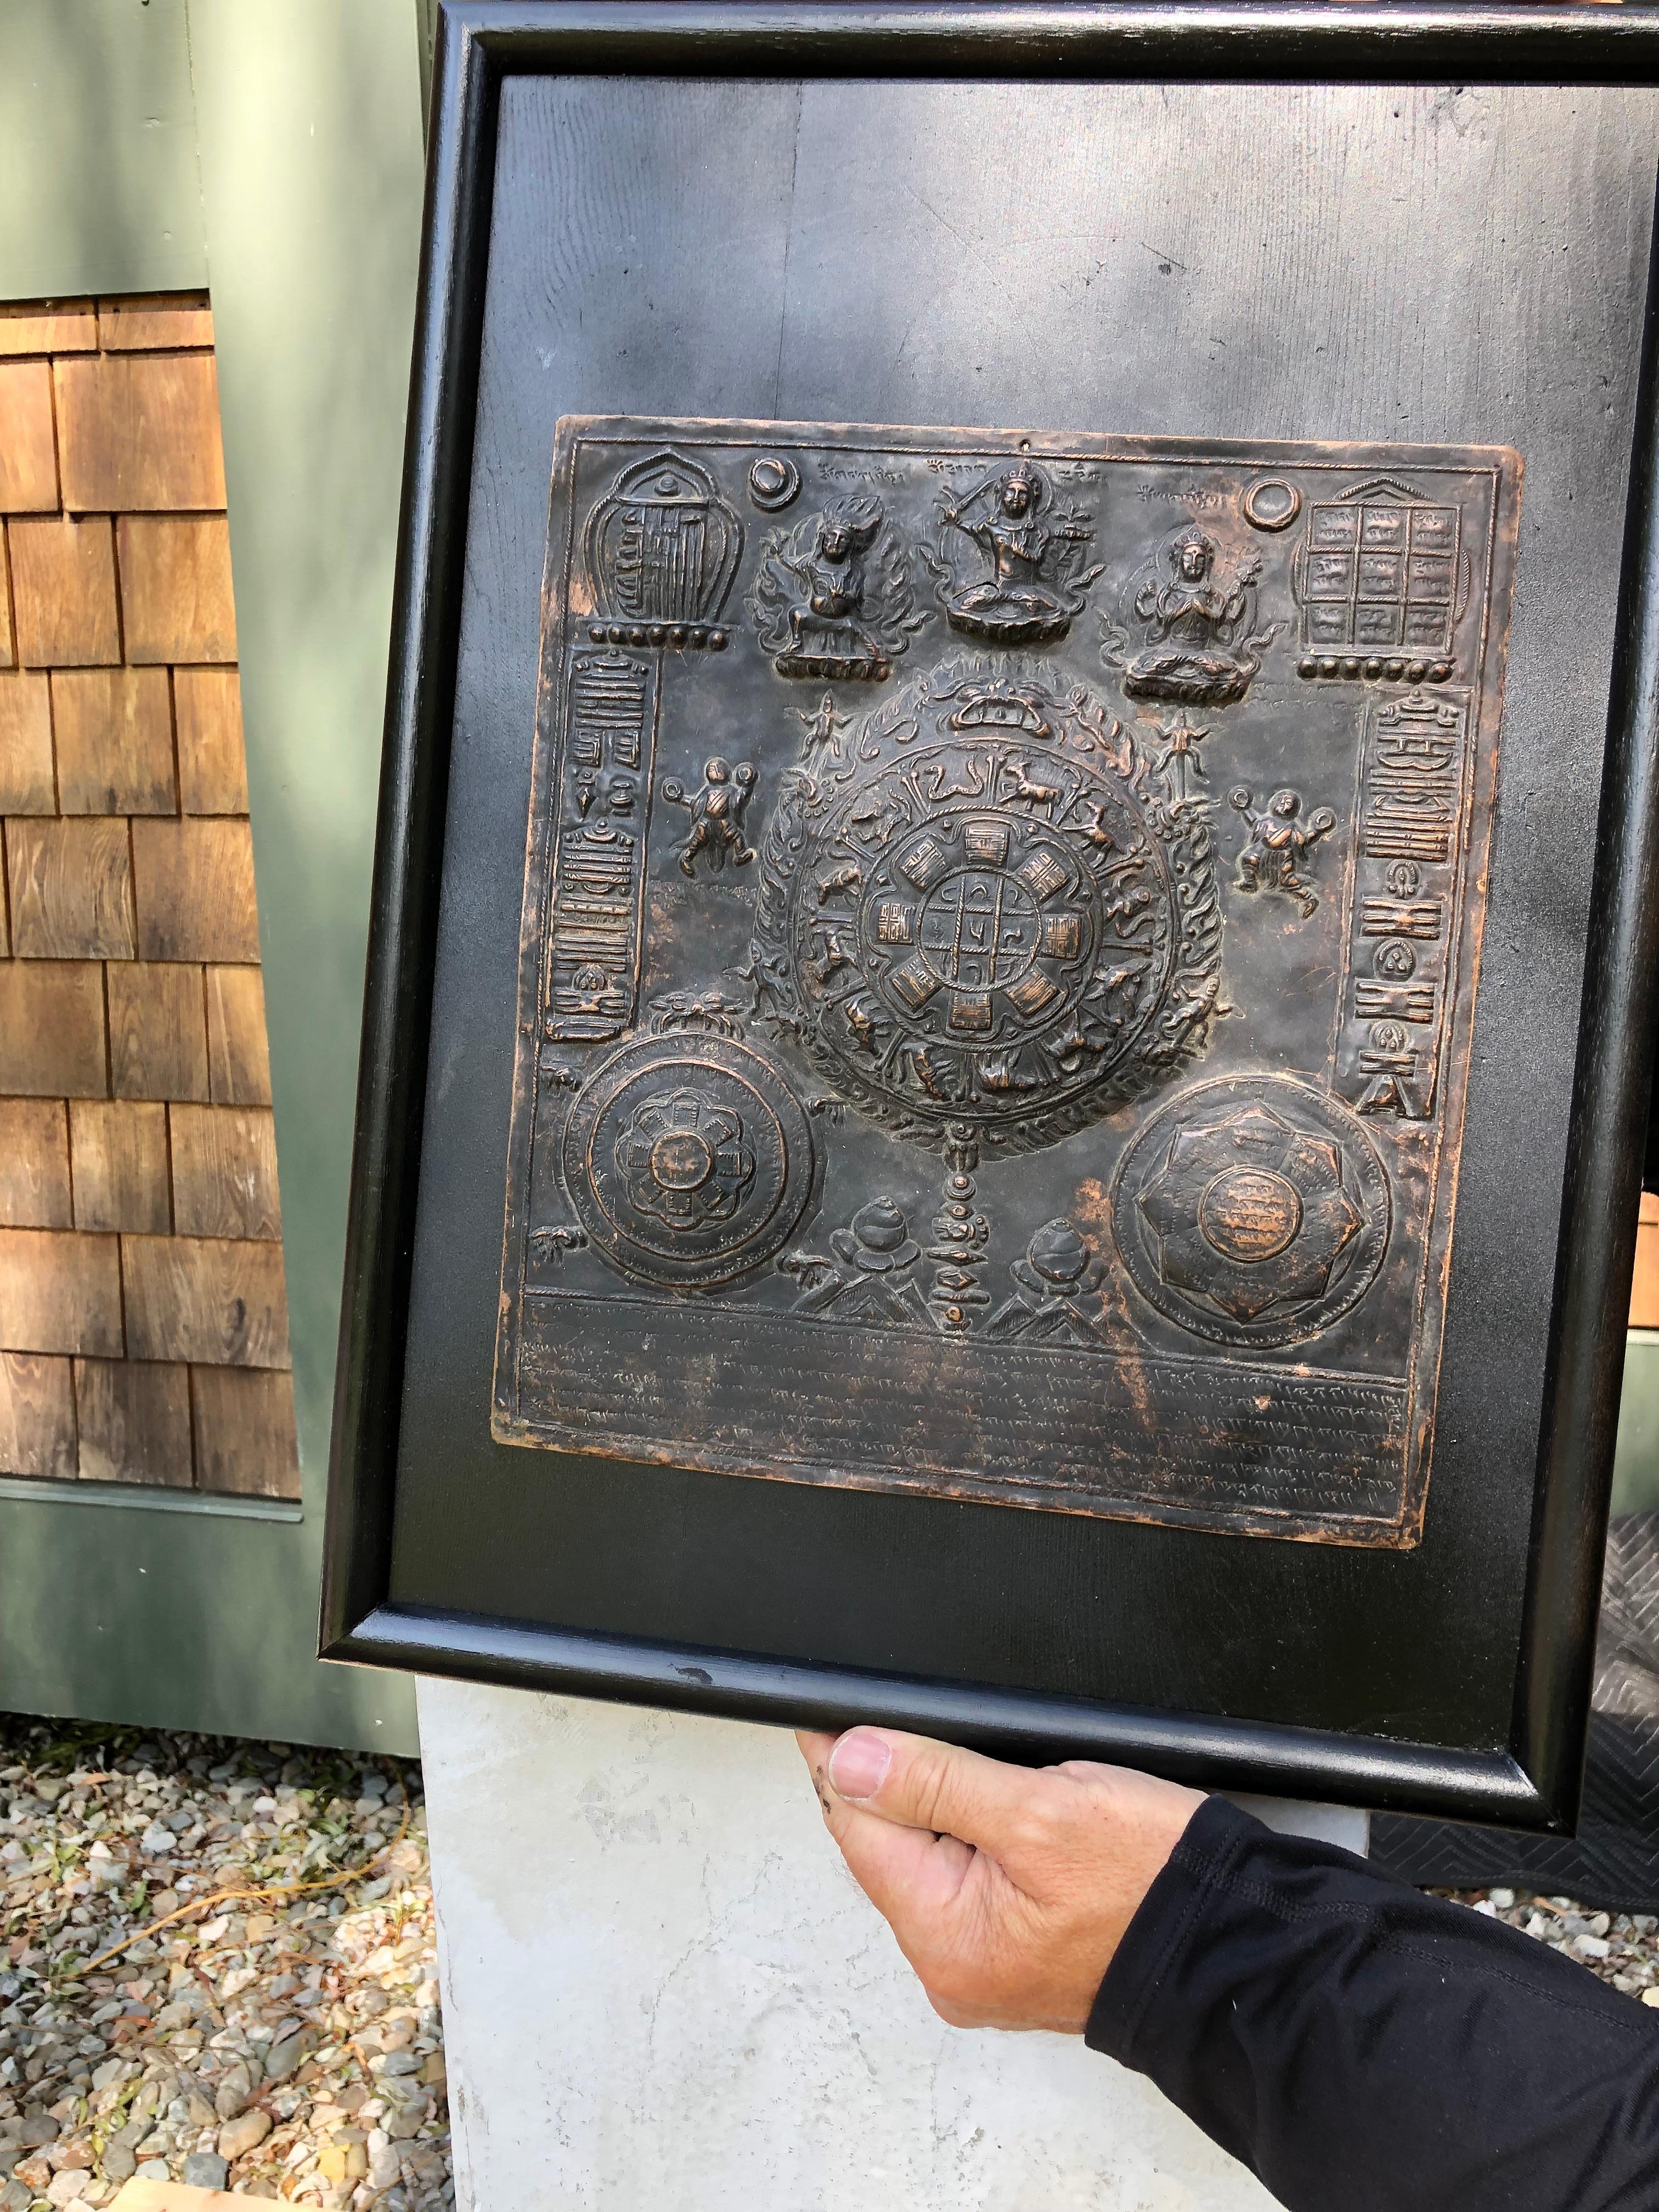 From our recent Japanese acquisition travels

Coming from an important private collection

Likely unique.

A fine authentic old Tibetan copper plate 